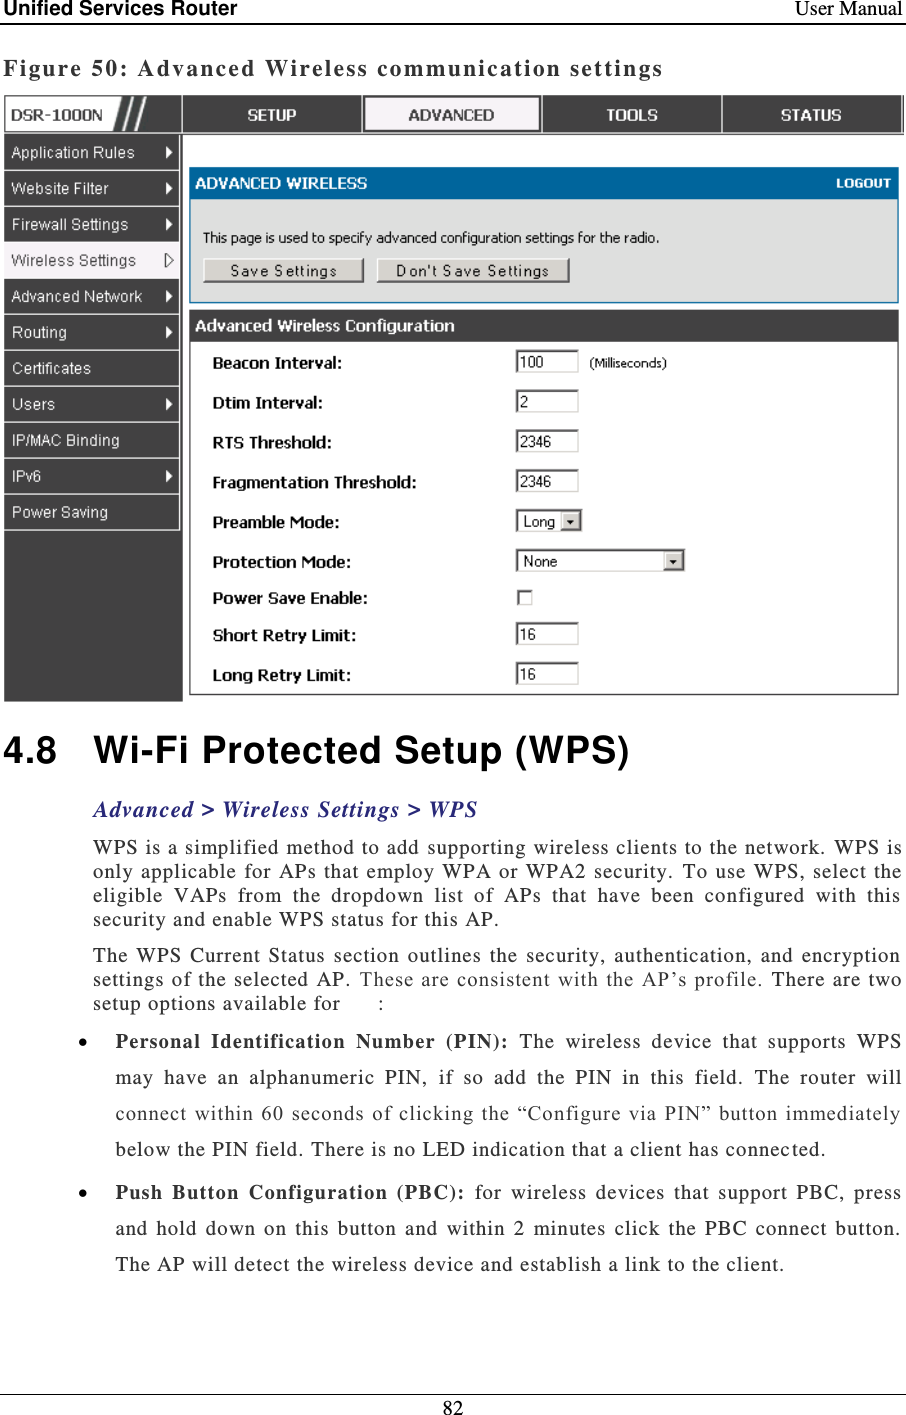 Unified Services Router    User Manual 82  Figure 50: Adv anced Wireless communication settings   4.8  Wi-Fi Protected Setup (WPS) Advanced &gt; Wireless Settings &gt; WPS WPS is a simplified method to add supporting wireless clients to the network. WPS is only applicable for  APs  that  employ WPA or WPA2 security.  To use WPS, select the eligible  VAPs  from  the  dropdown  list  of  APs  that  have  been  configured  with  this security and enable WPS status for this AP.   The  WPS  Current  Status  section  outlines  the  security,  authentication,  and  encryption settings of the selected  AP. These are consistent with the  AP’s  profile.  There  are two setup options available for   :  Personal  Identification  Number  (PIN):   The  wireless  device  that  supports  WPS may  have  an  alphanumeric  PIN,  if  so  add  the  PIN  in  this  field.  The  router  will connect  within  60  seconds  of clicking  the  “Configure  via  PIN” button immediately below the PIN field. There is no LED indication that a client has connected.  Push  Button  Configuration  (PBC):  for  wireless  devices  that  support  PBC,  press and  hold  down  on  this  button  and  within  2  minutes  click  the  PBC  connect  button.  The AP will detect the wireless device and establish a link to the client.   